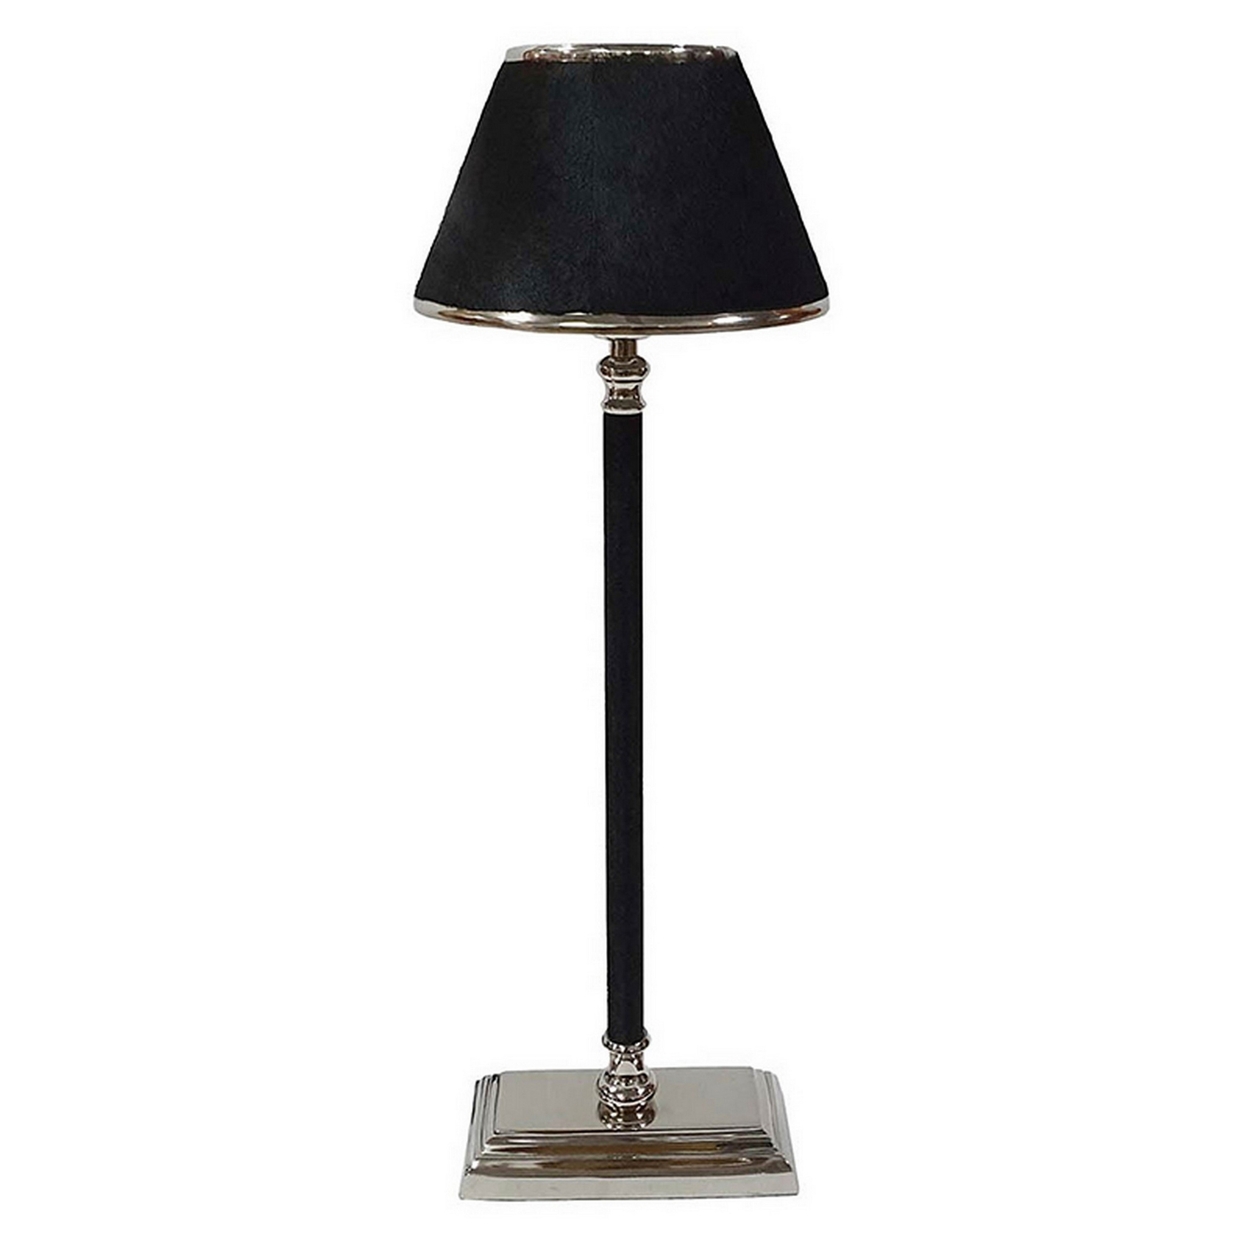 23 Inch Table Lamp, Leather Wrapped Tapered Shade, Aluminum, Black, Nickel- Saltoro Sherpi